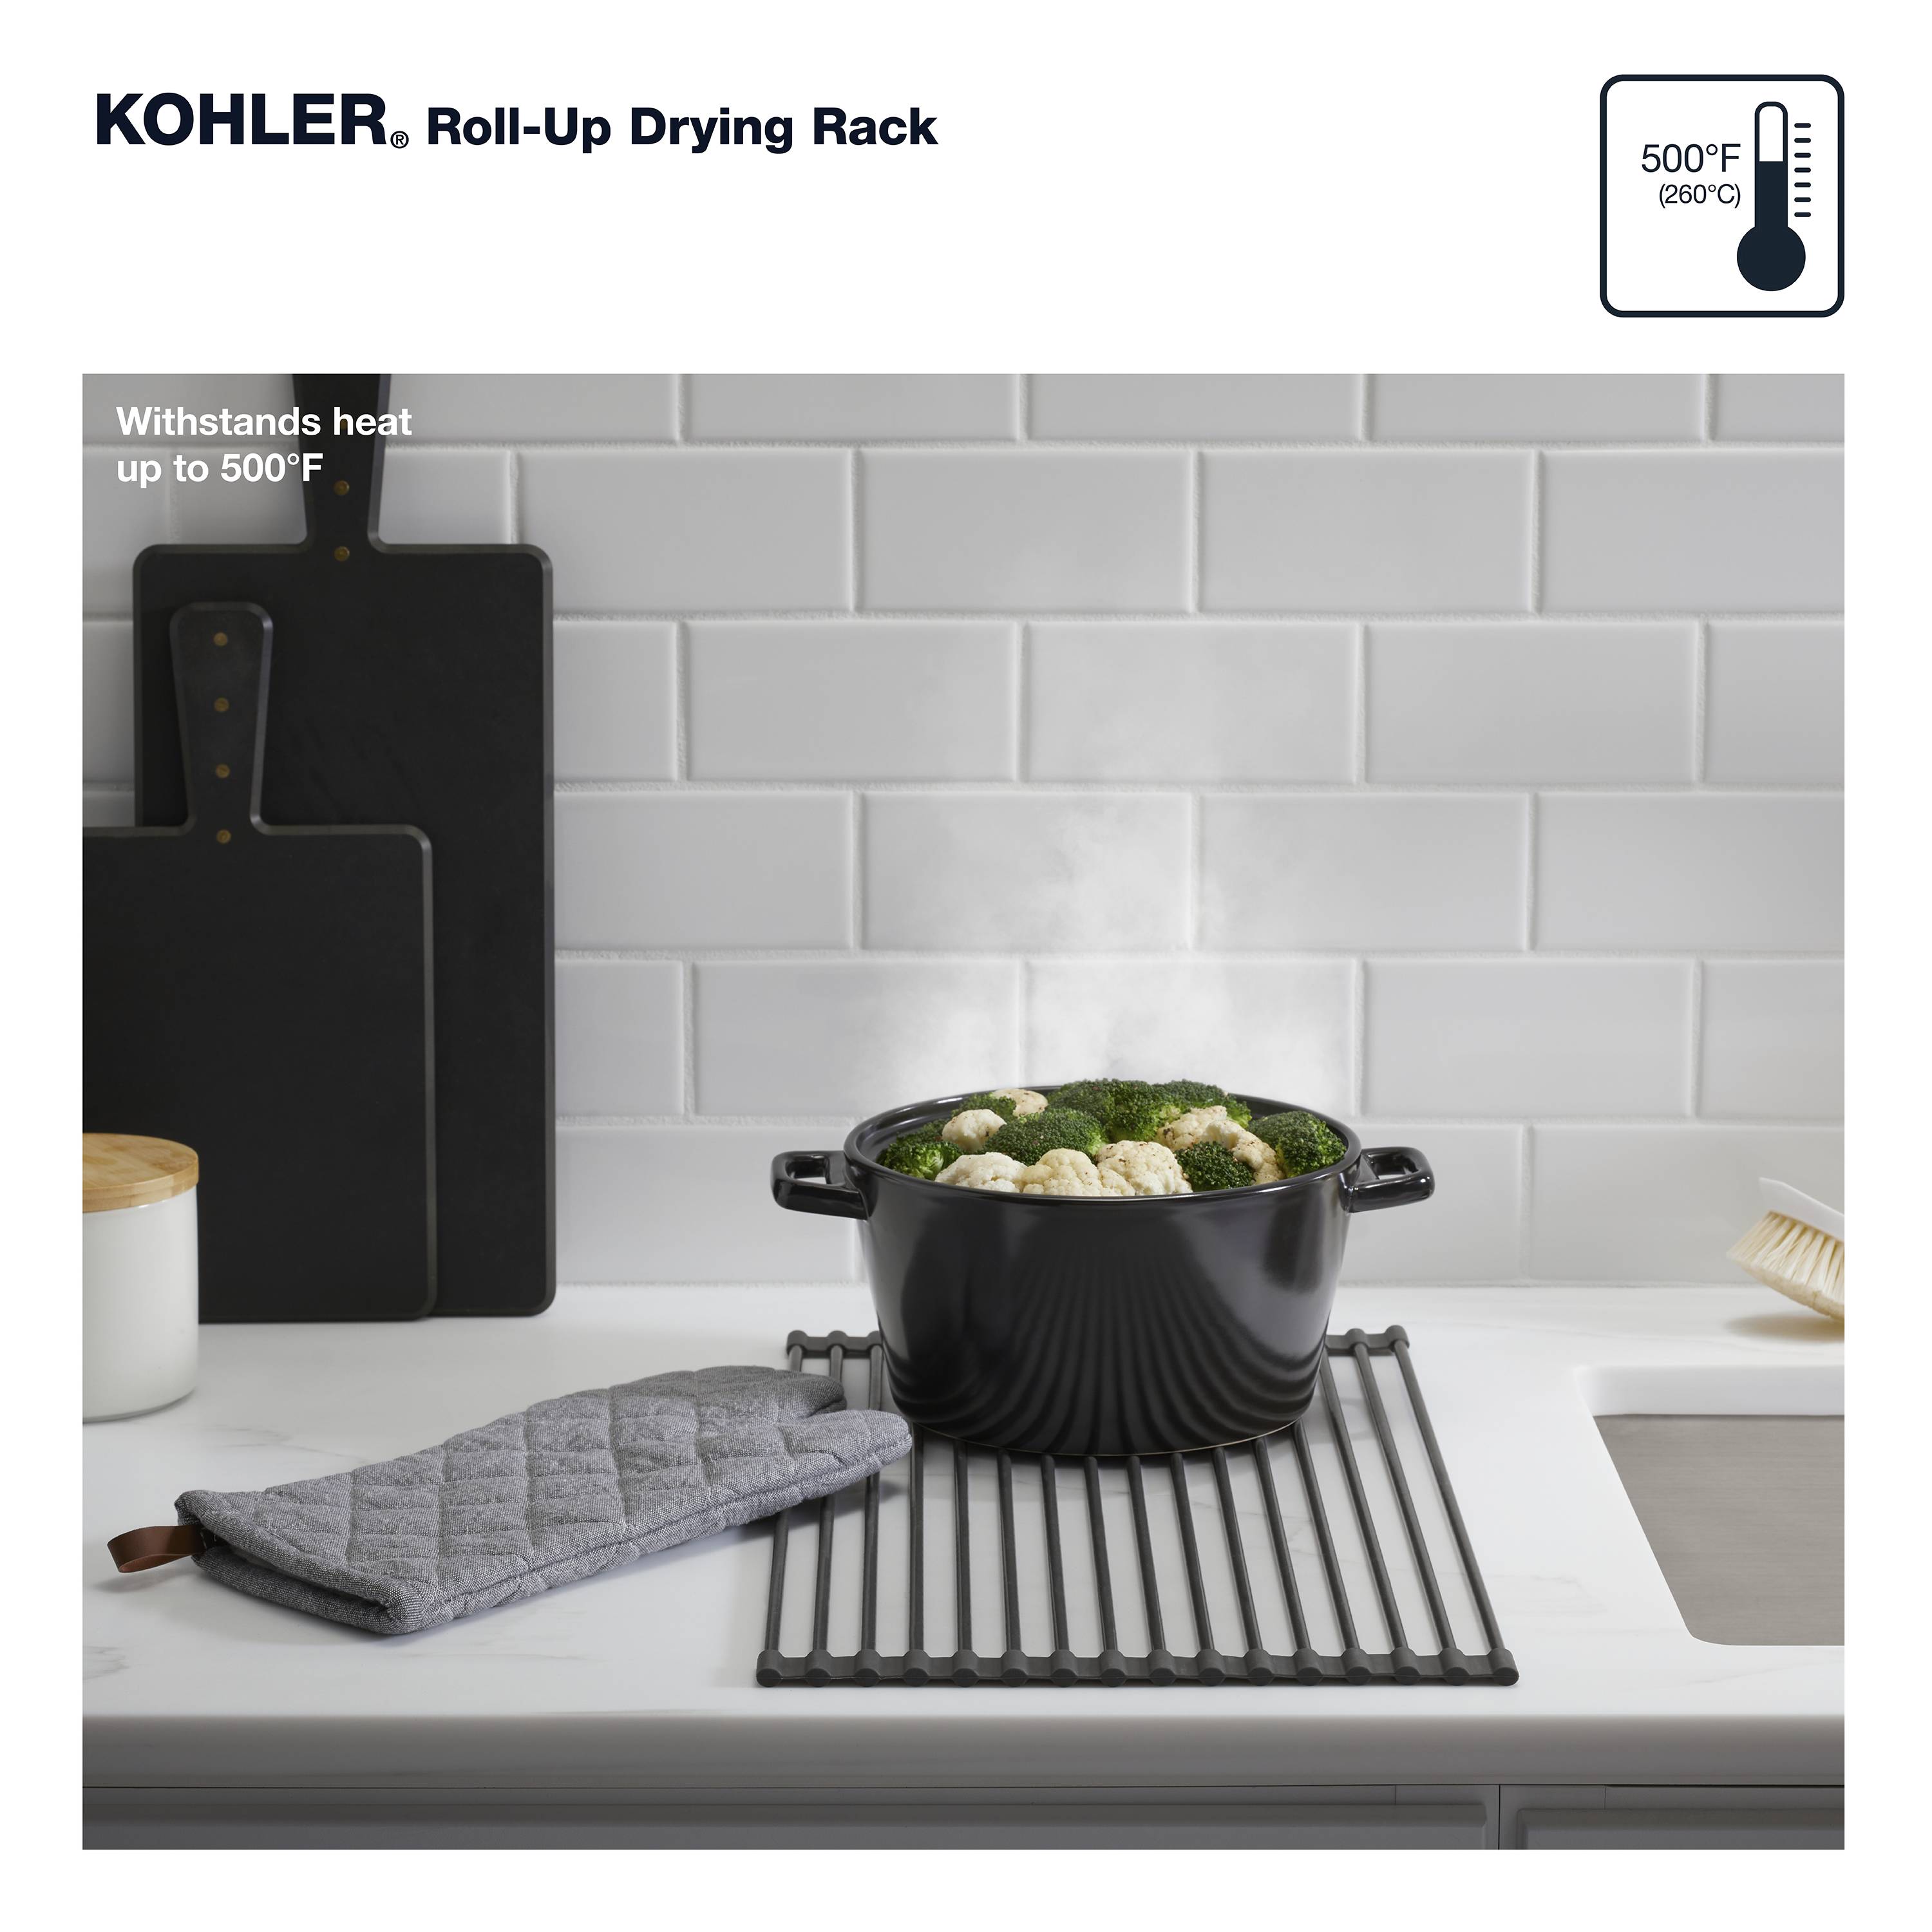 Buy Silicone Dish Drying Mat For Kitchen Counter In Light Grey